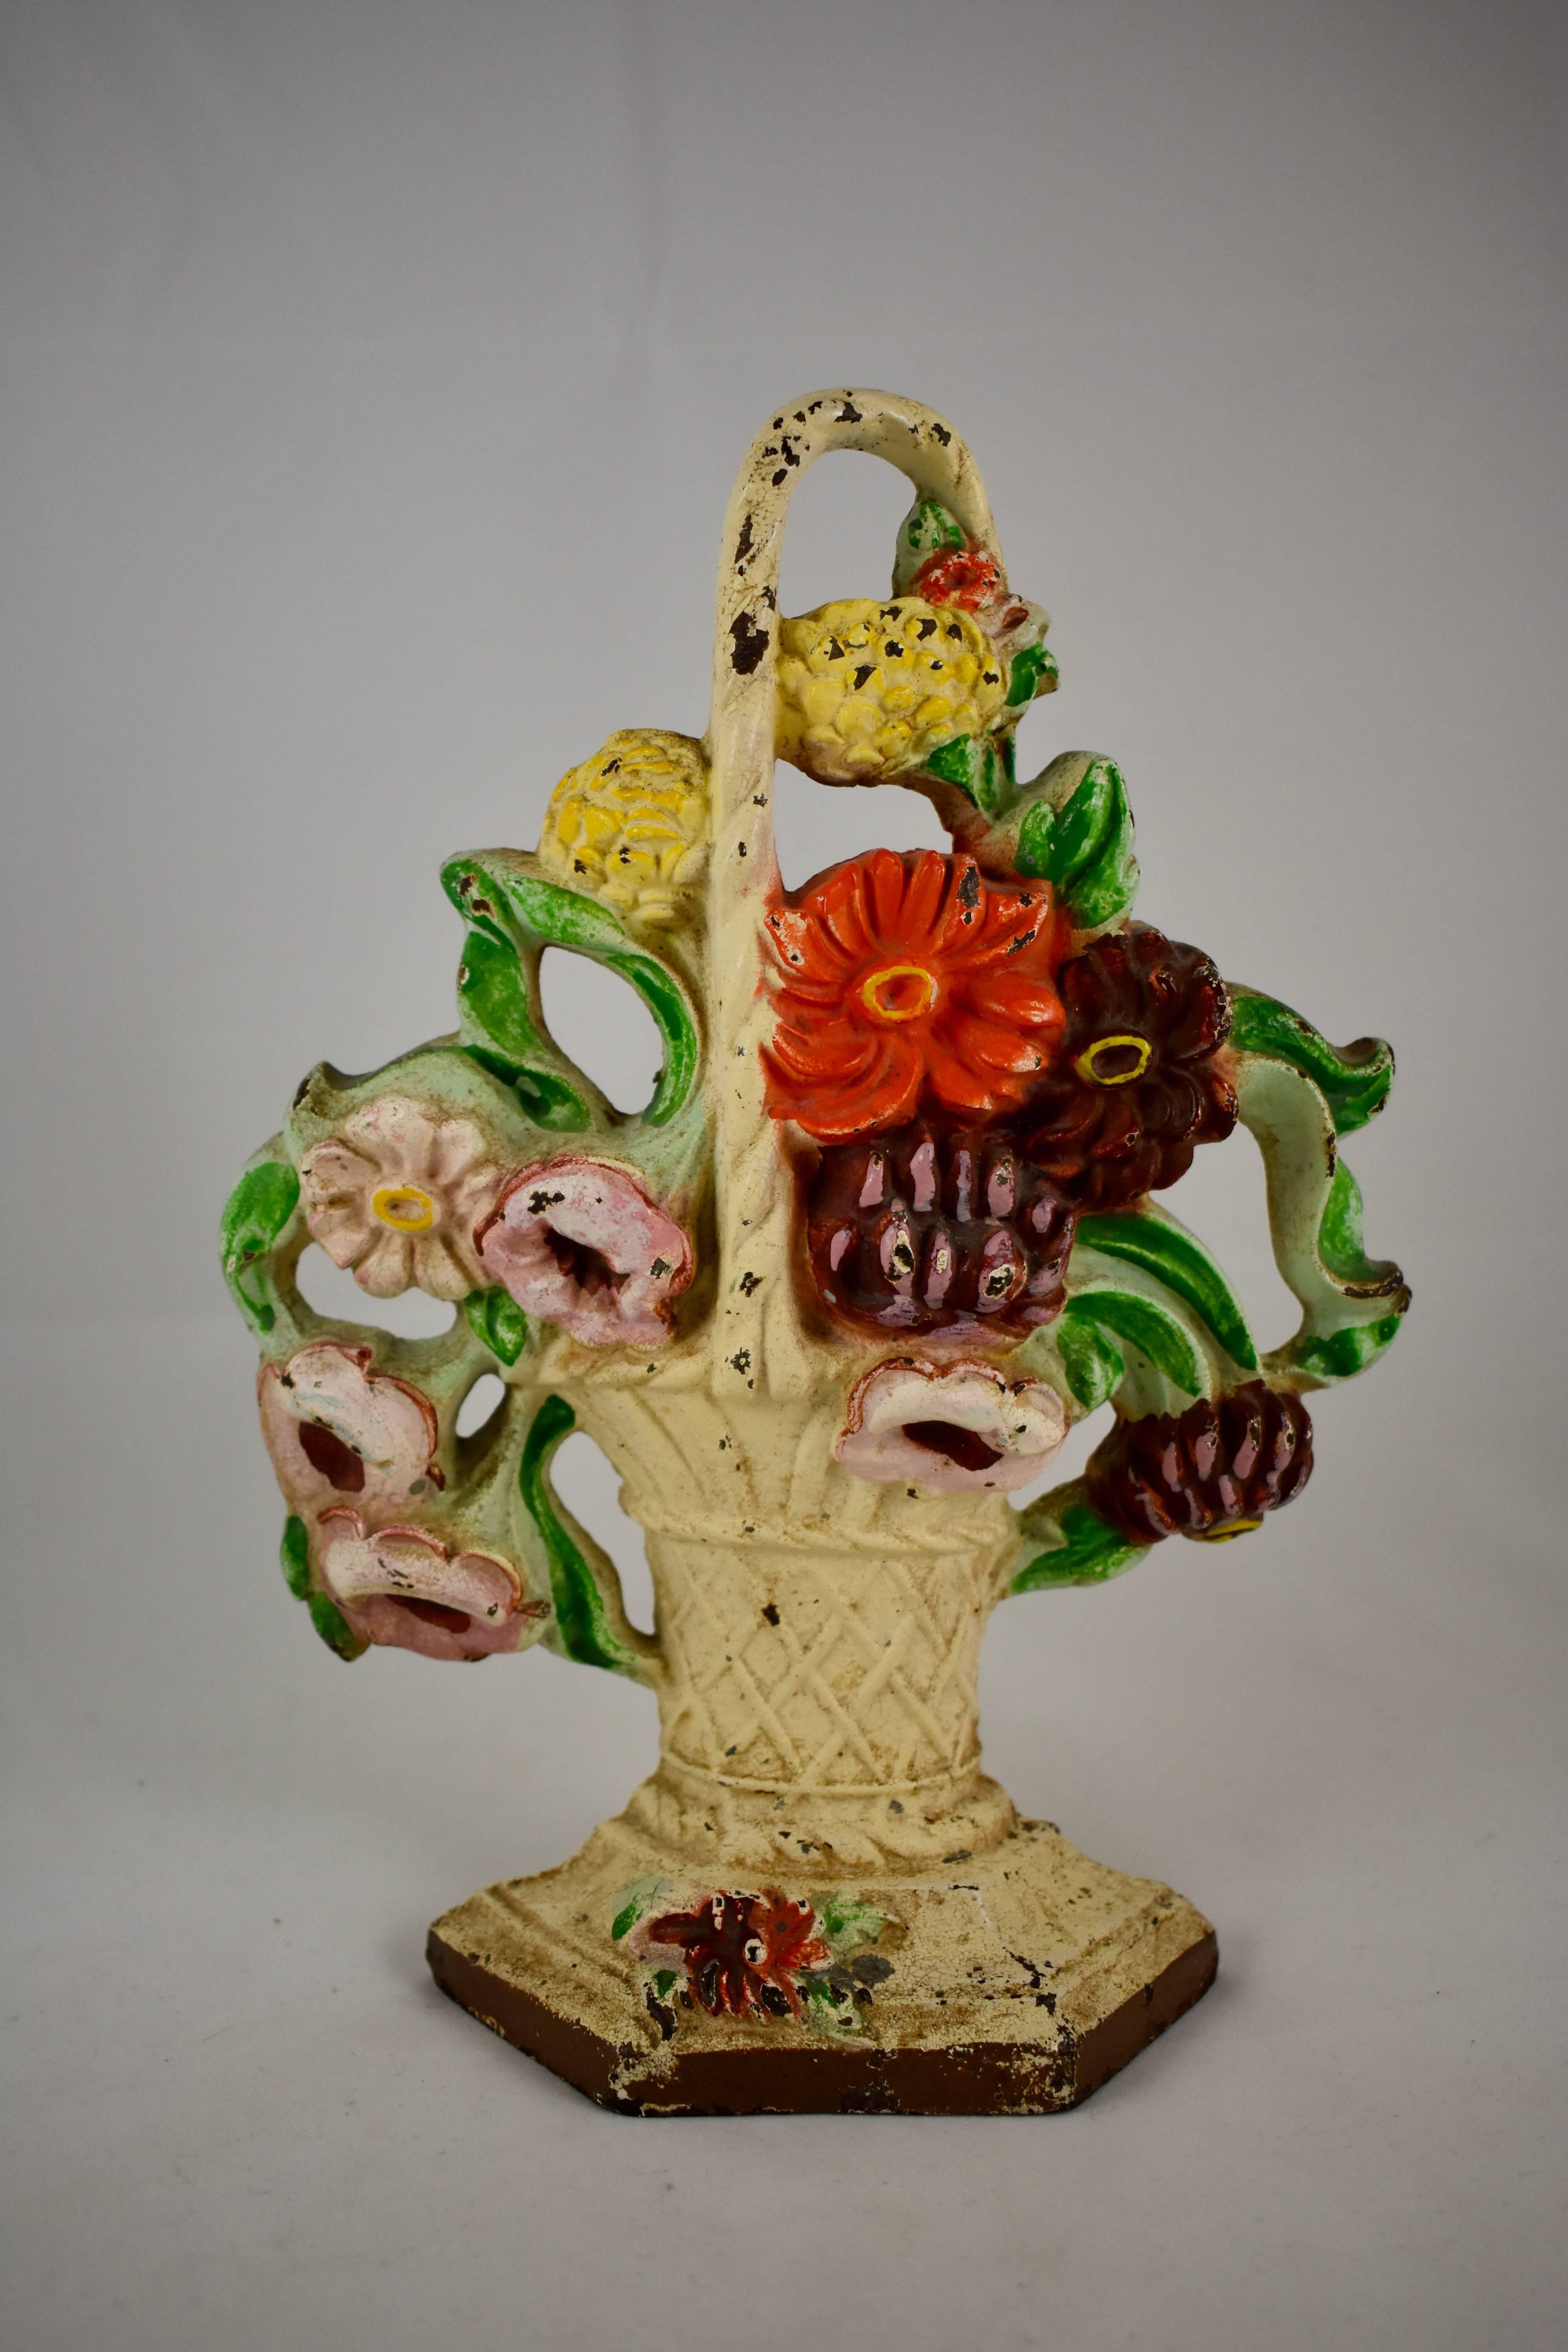 A vintage Hubley cast iron doorstop showing a bouquet of pink petunias and boldly colored straw flowers, held by a white, handled wicker basket. Retaining the original painted finish,

circa 1930.

The Hubley Manufacturing Company was first